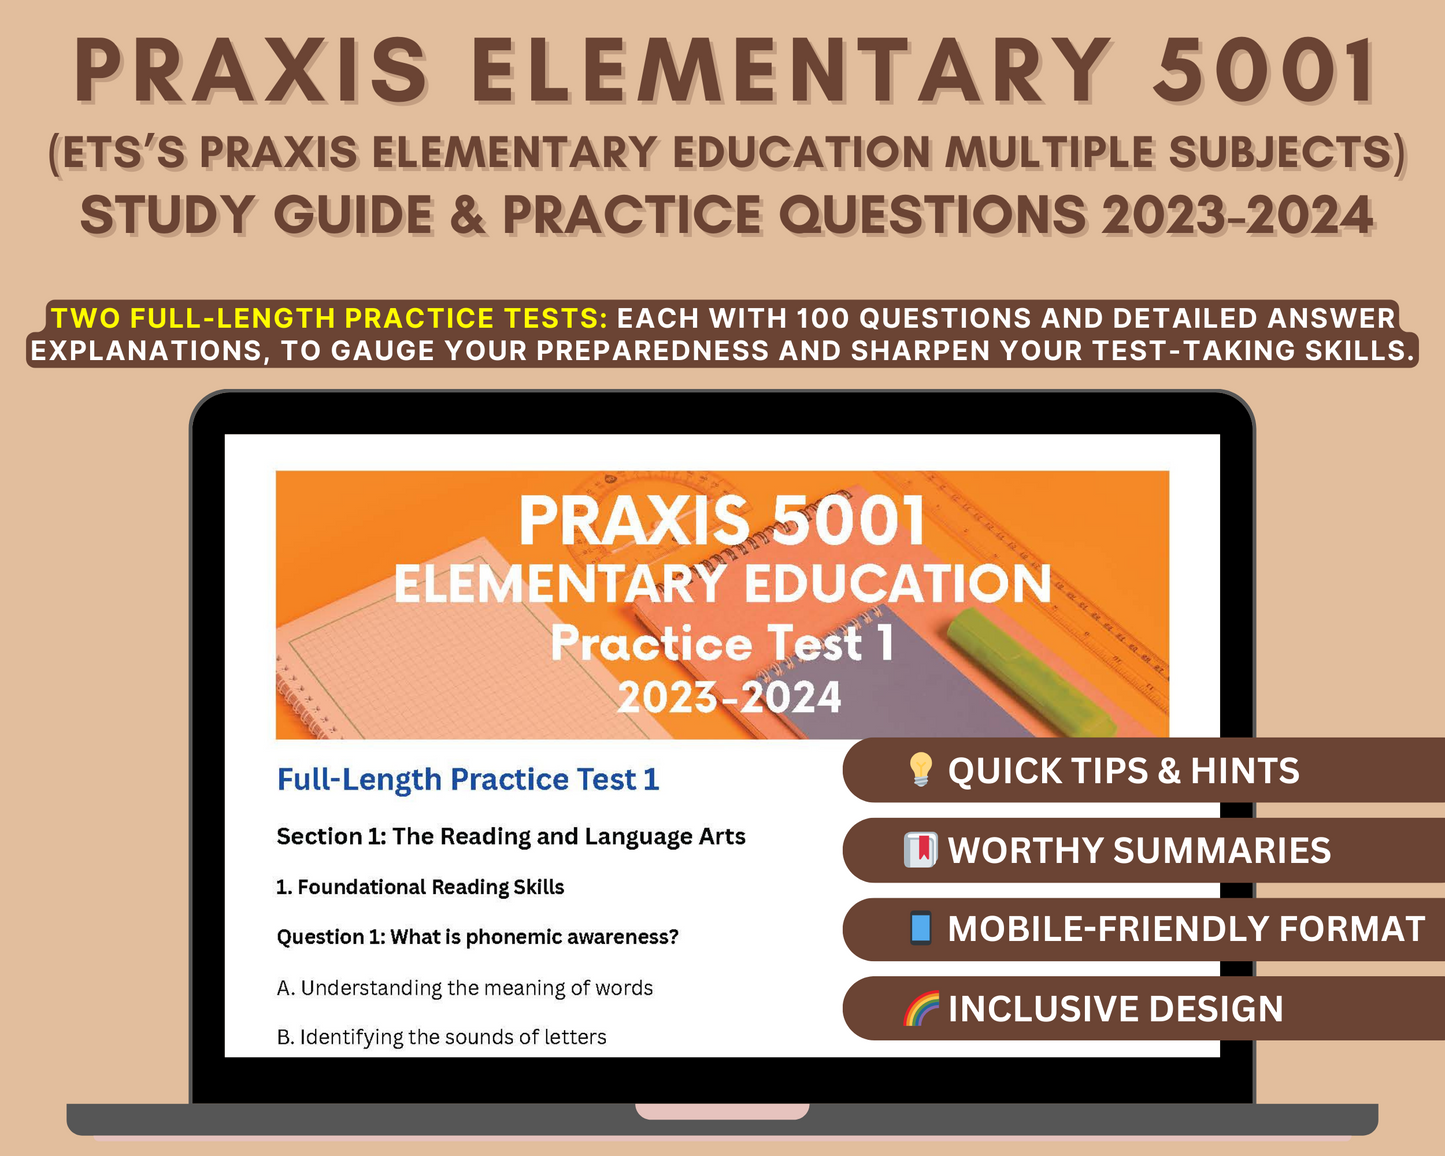 Praxis Elementary Education 5001 Study Guide 2023-2024: In-Depth Content Review, Practice Tests & Exam Strategies